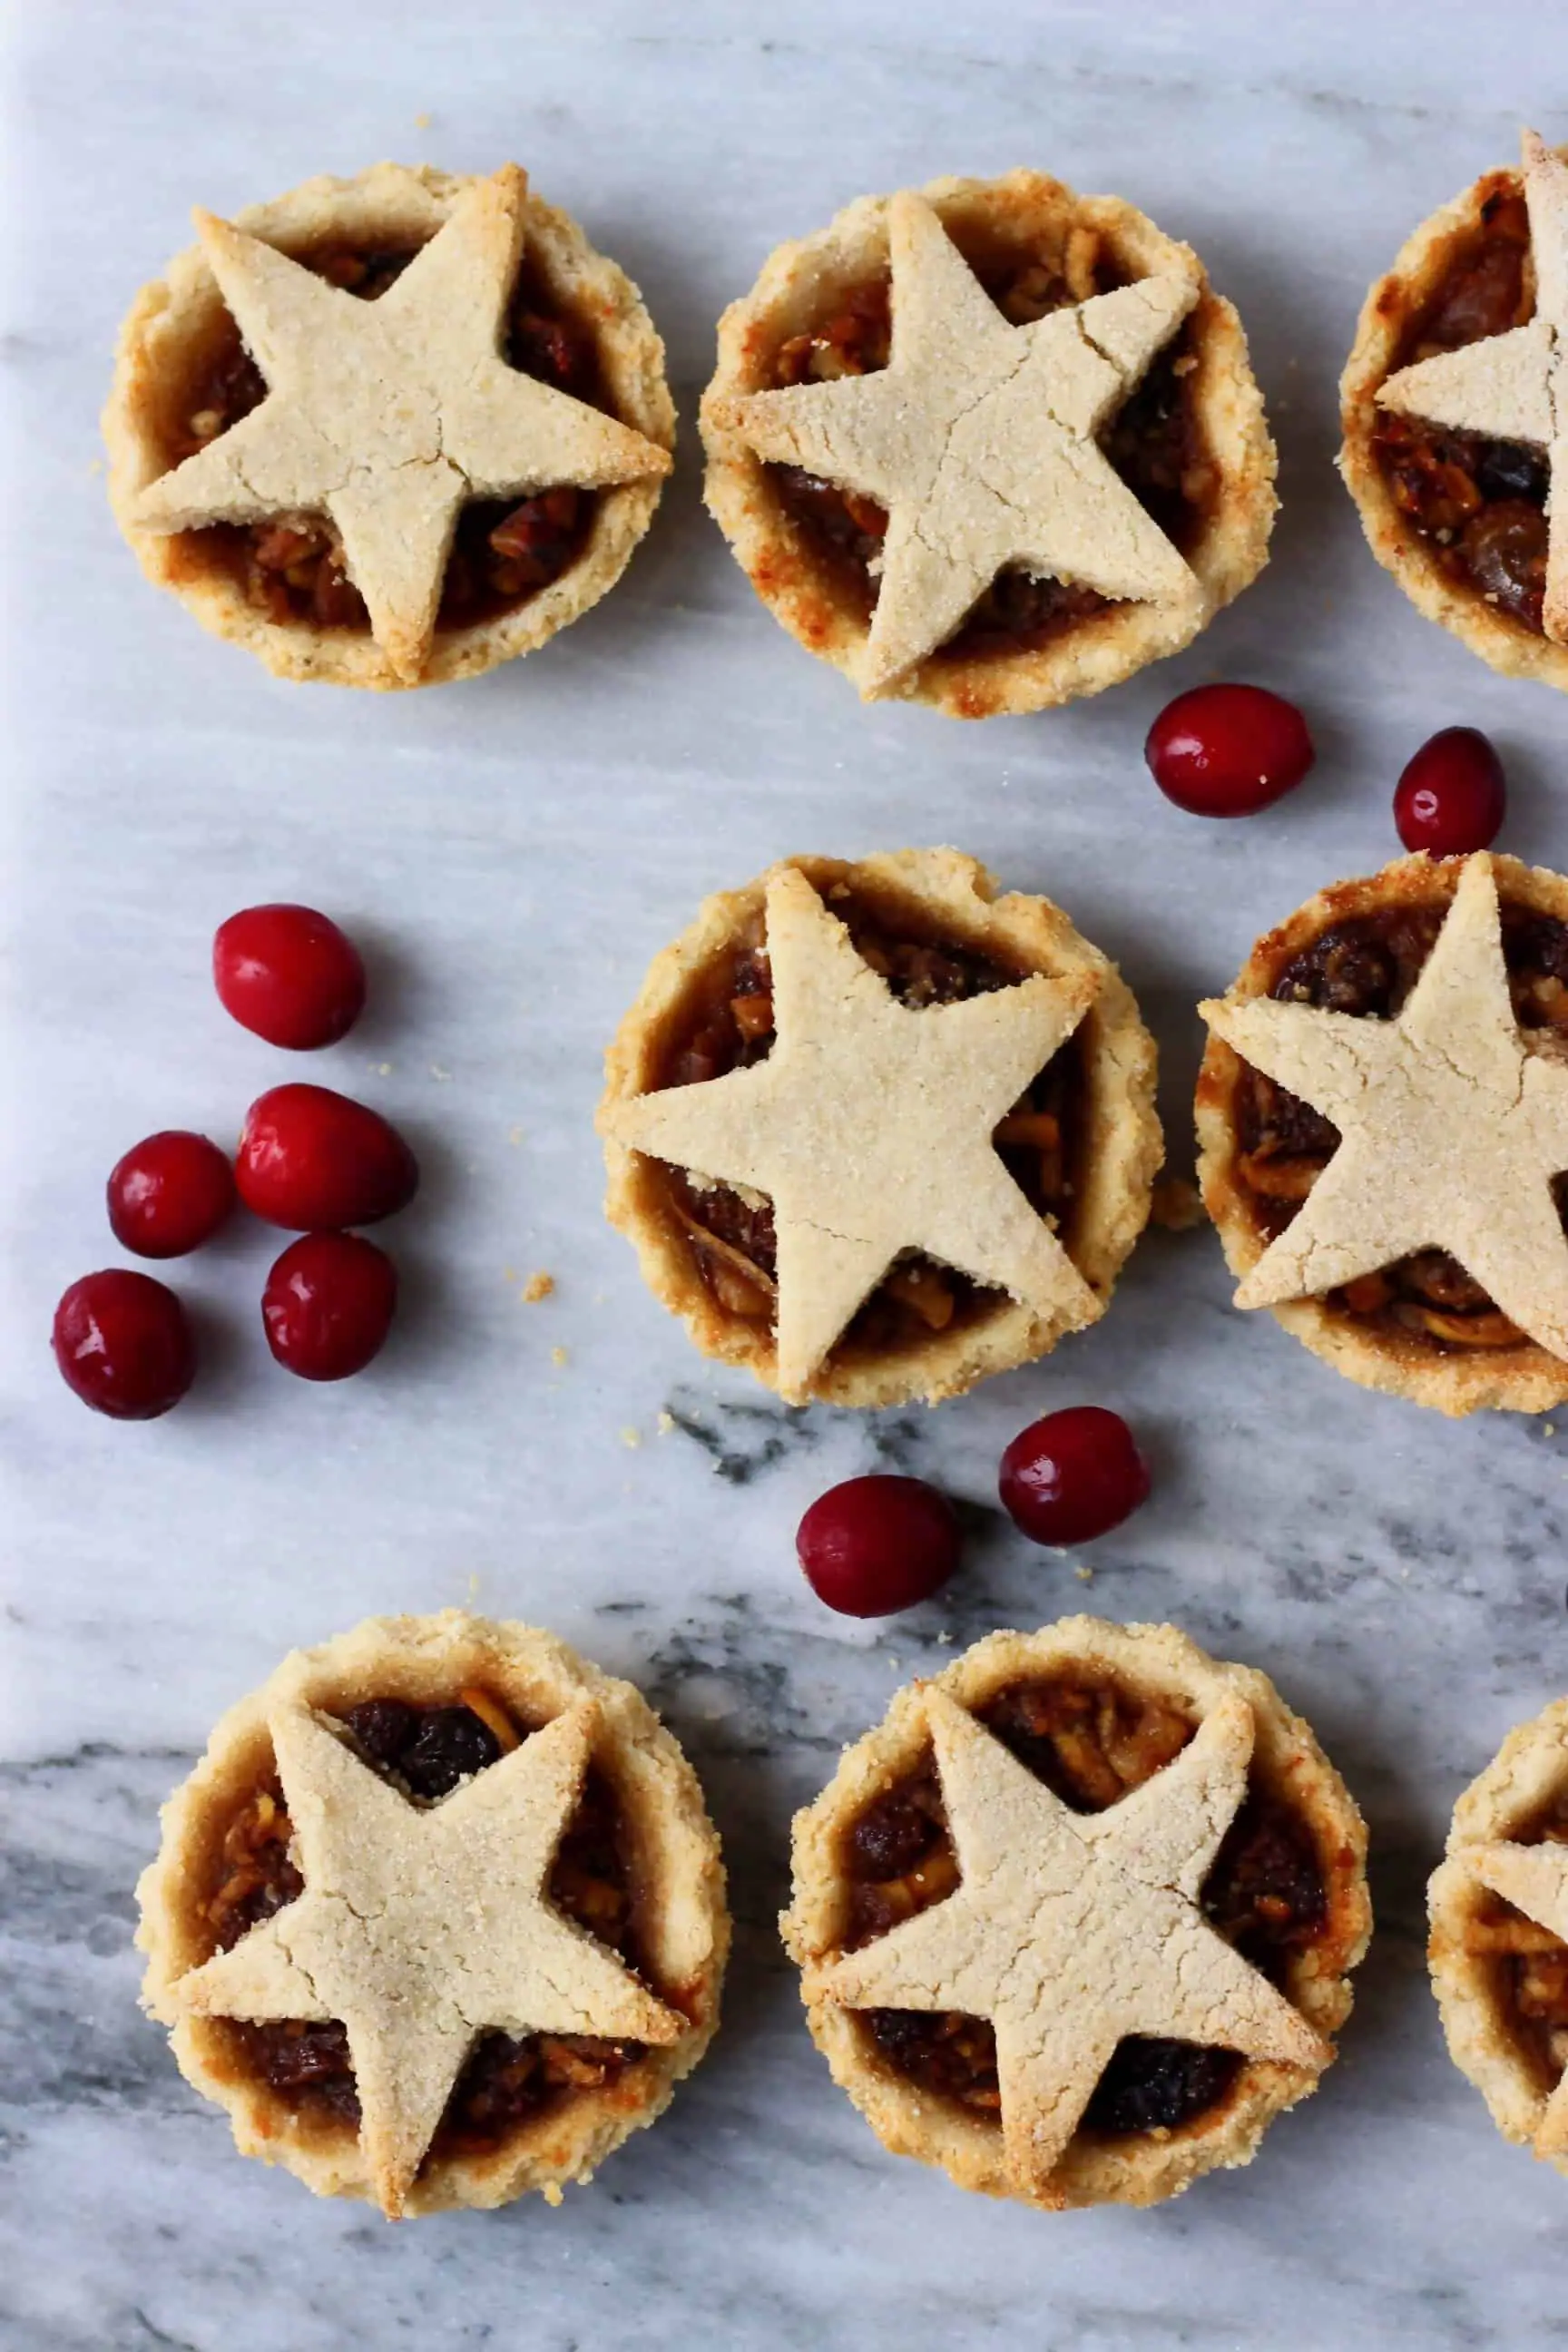 Six gluten-free vegan mince pies topped with pastry stars against a marble background